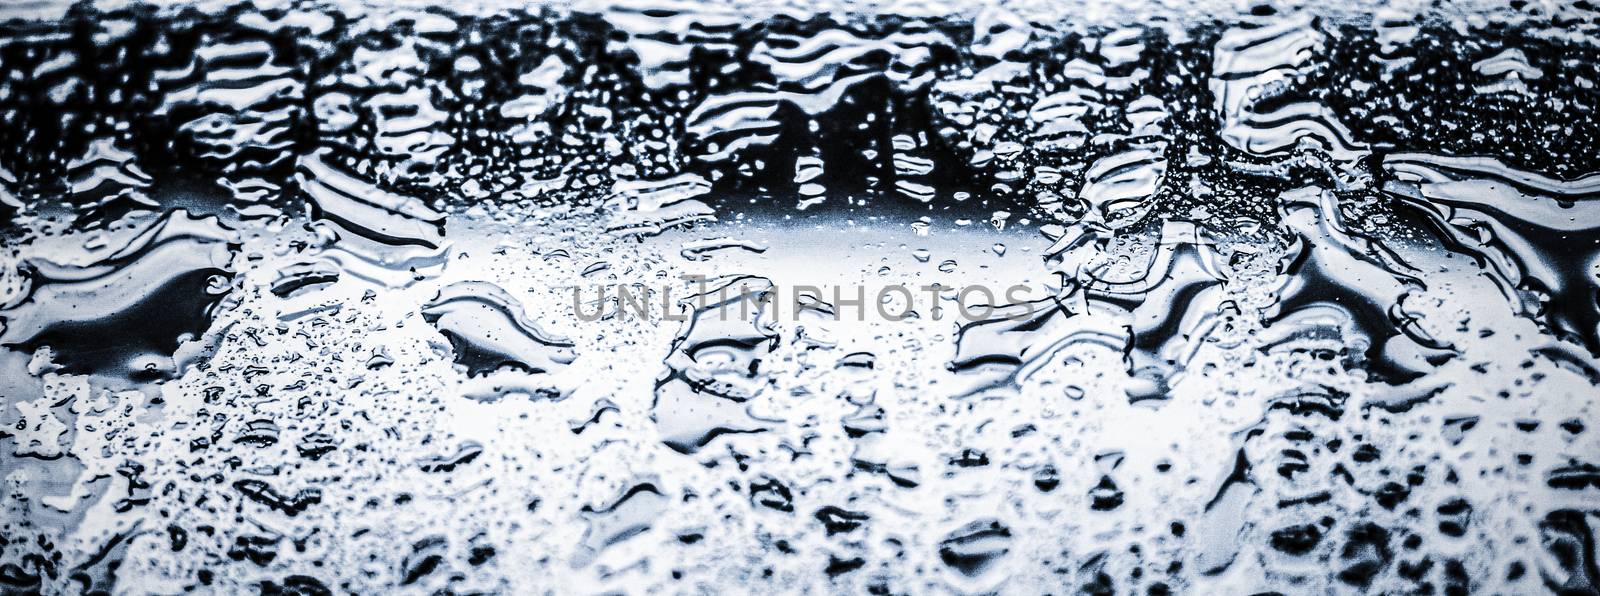 Water texture abstract background, aqua drops on silver glass as by Anneleven